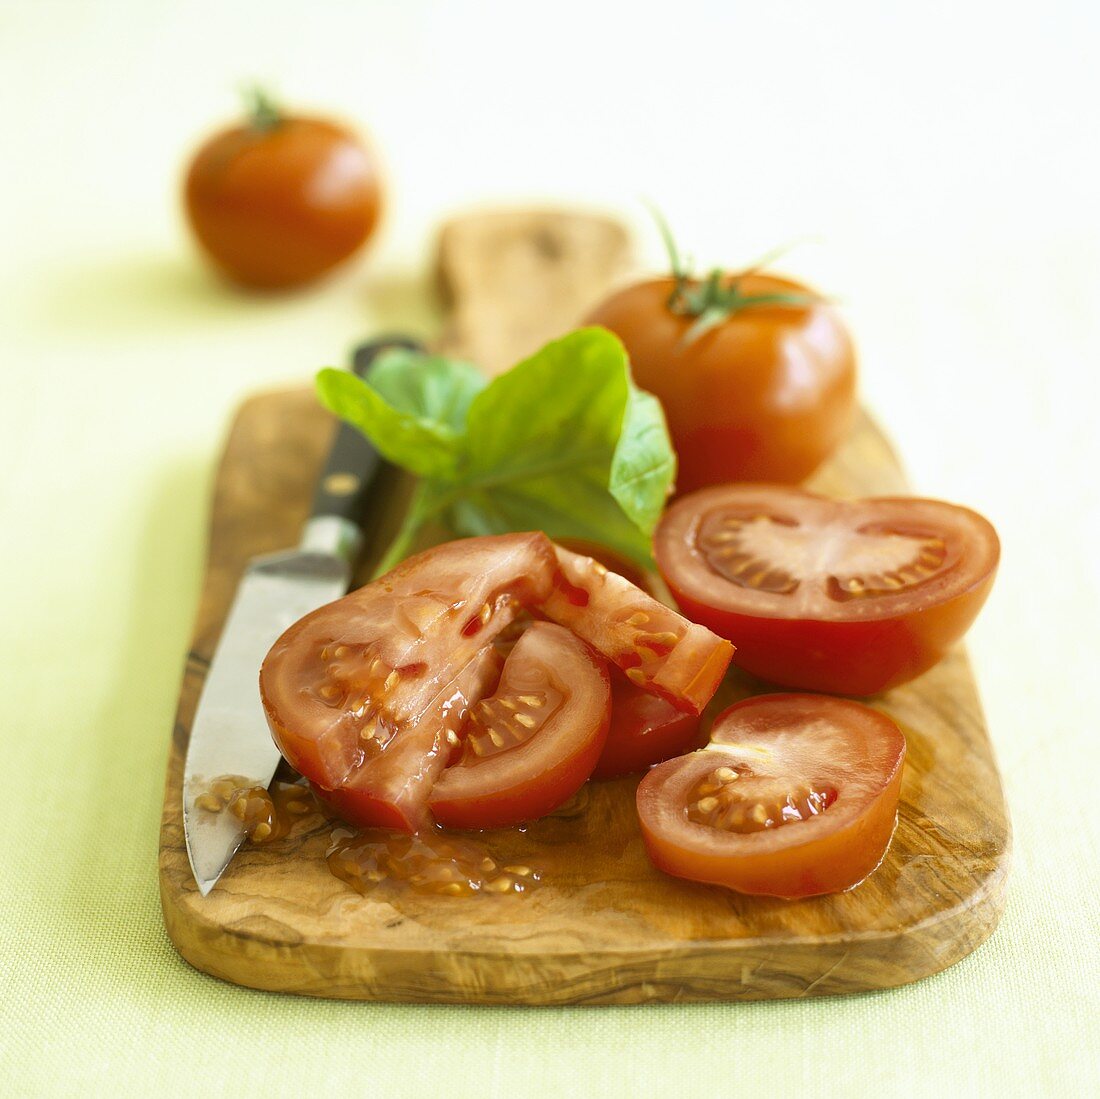 Sliced tomatoes with basil and knife